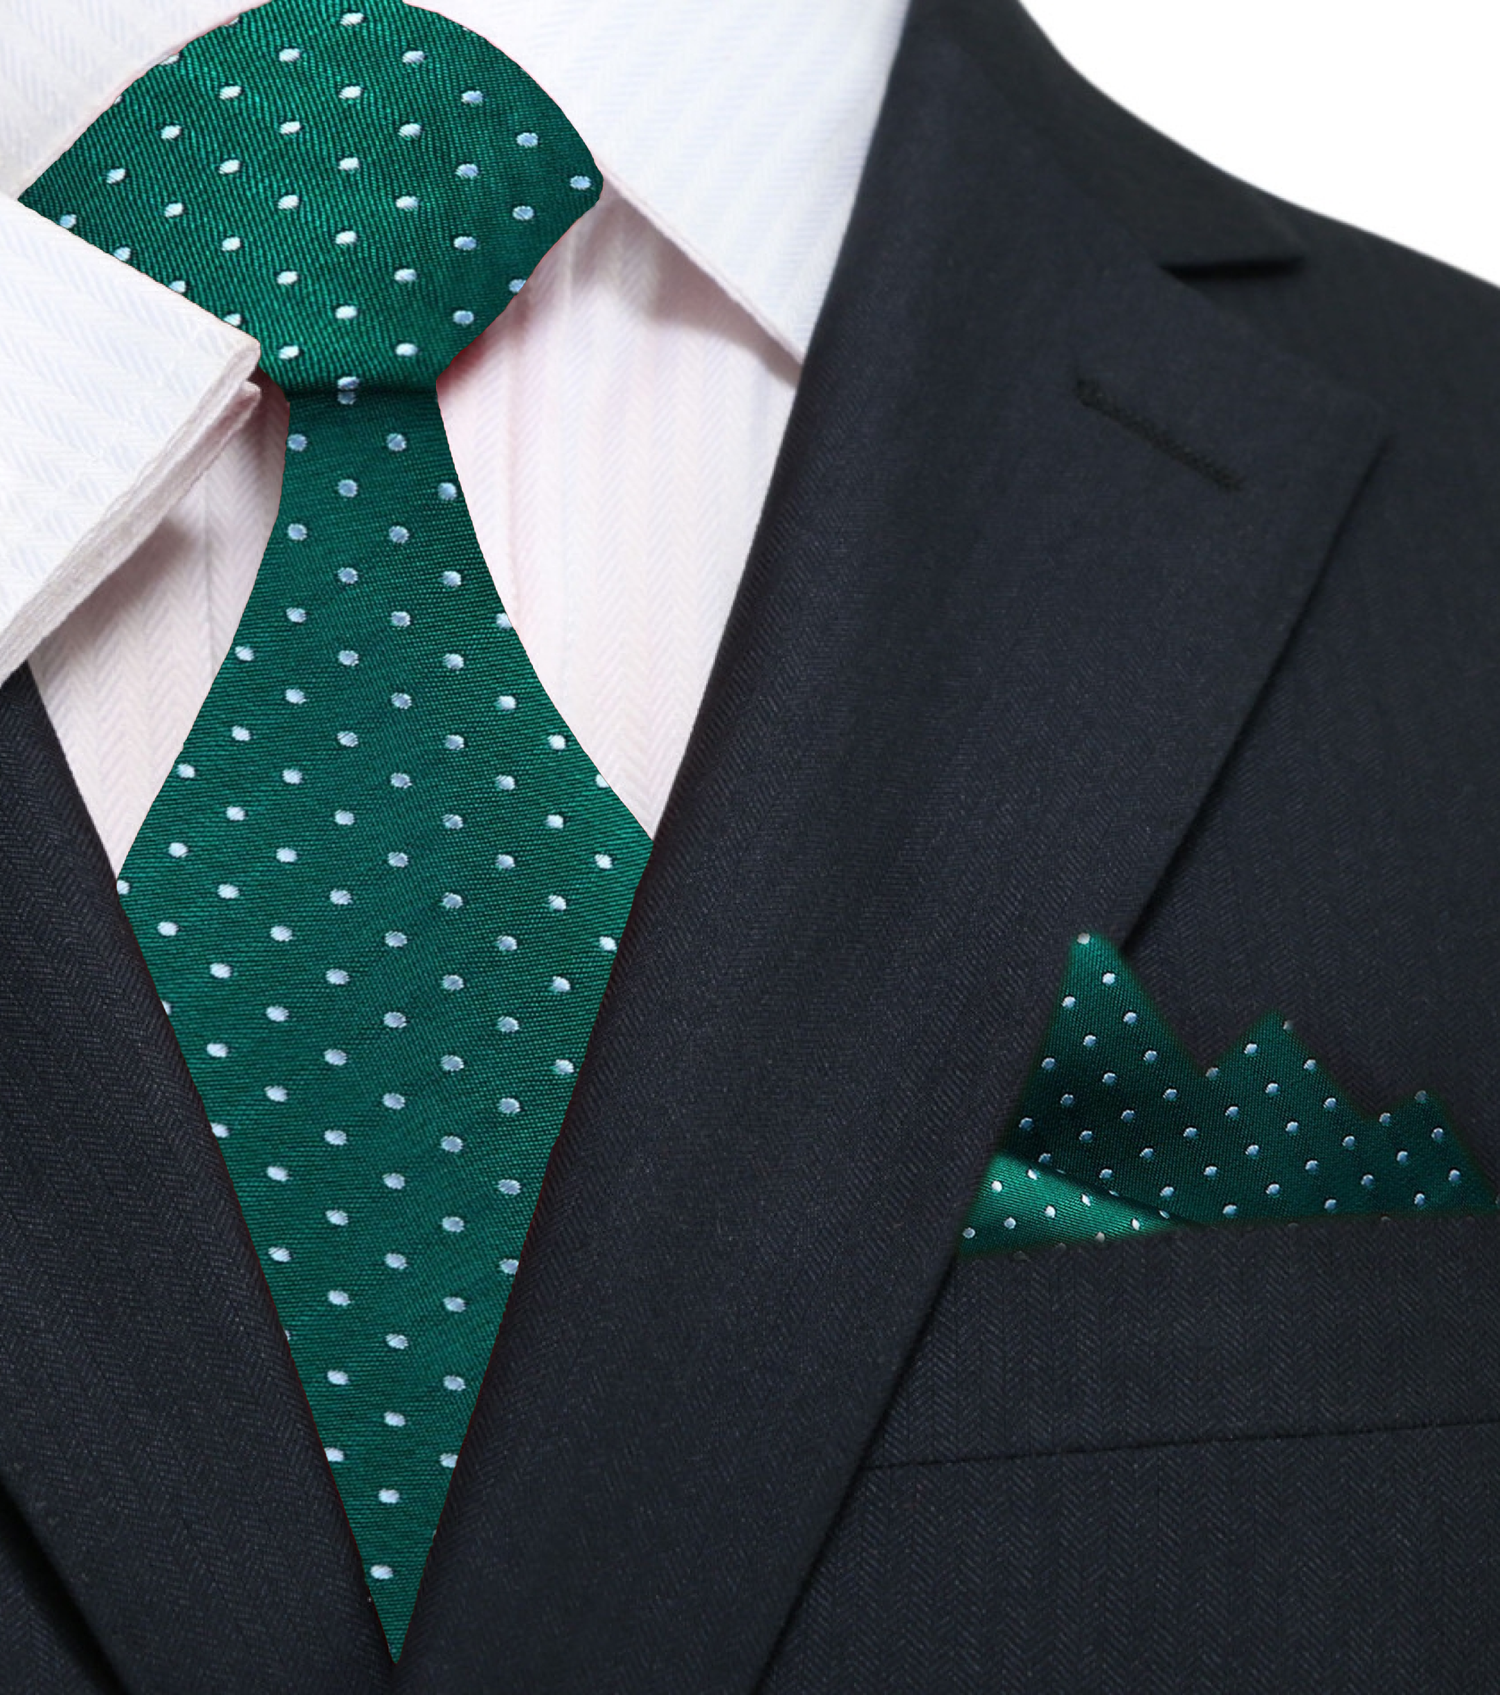 Main: A Green and White Polka Tie and Pocket Square